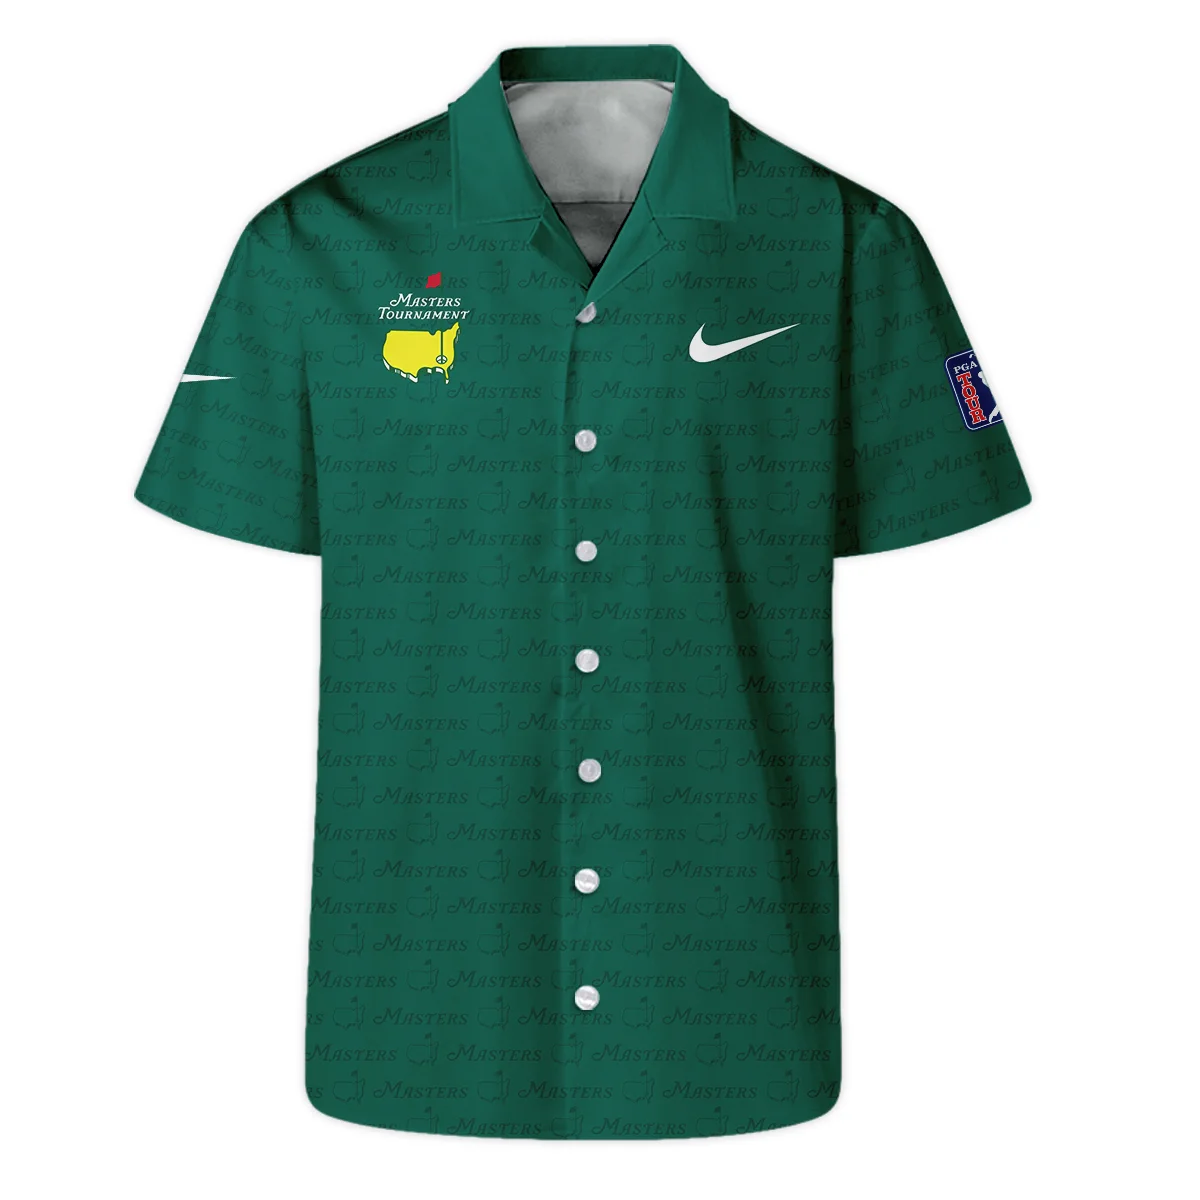 Golf Pattern Cup White Mix Green Masters Tournament Nike Unisex T-Shirt Style Classic T-Shirt